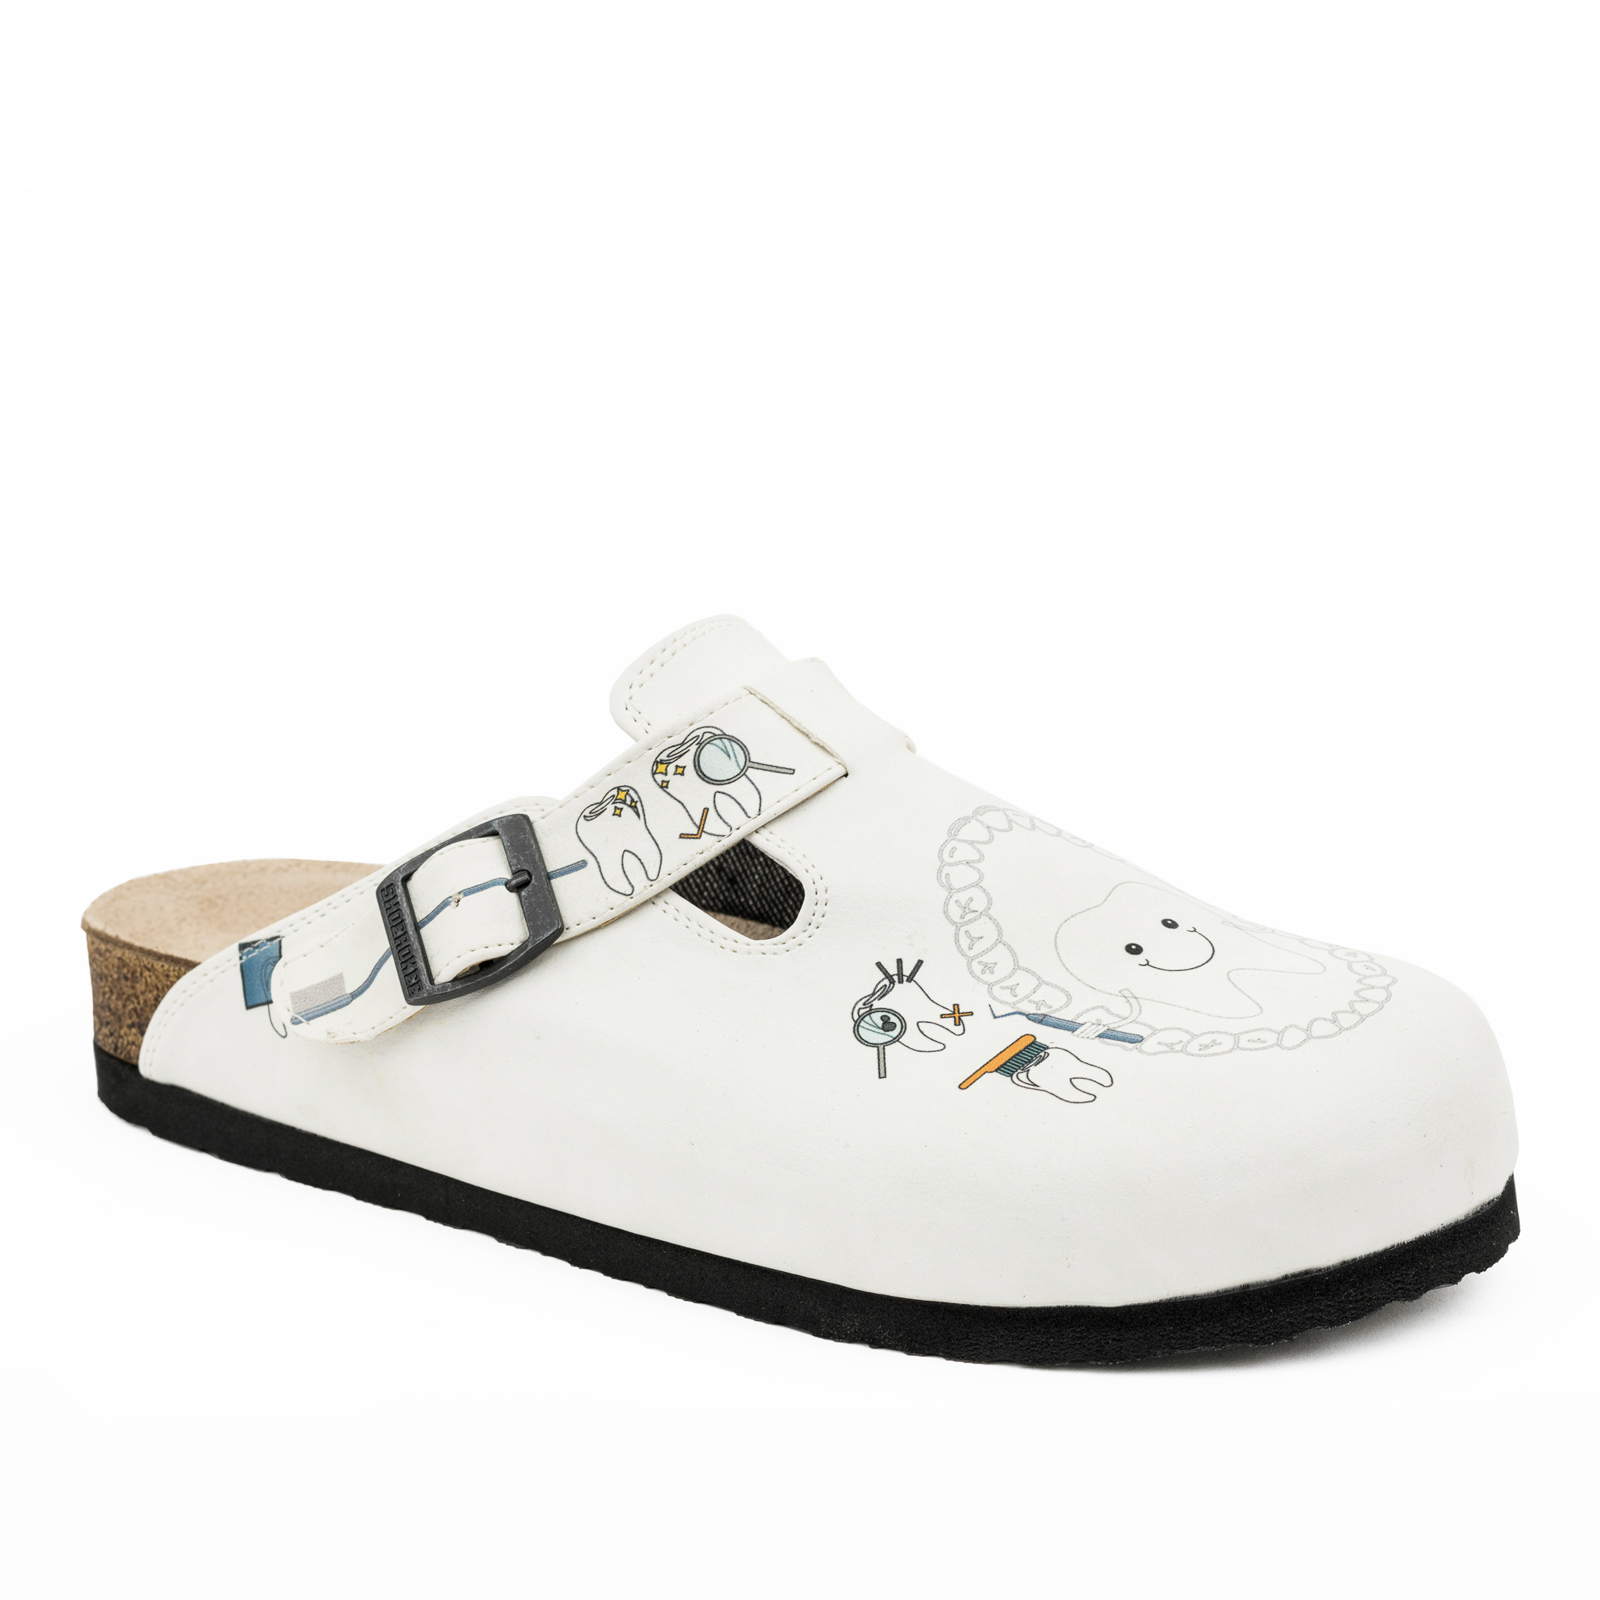 Patterned women clogs A022 - DENTIST - WHITE